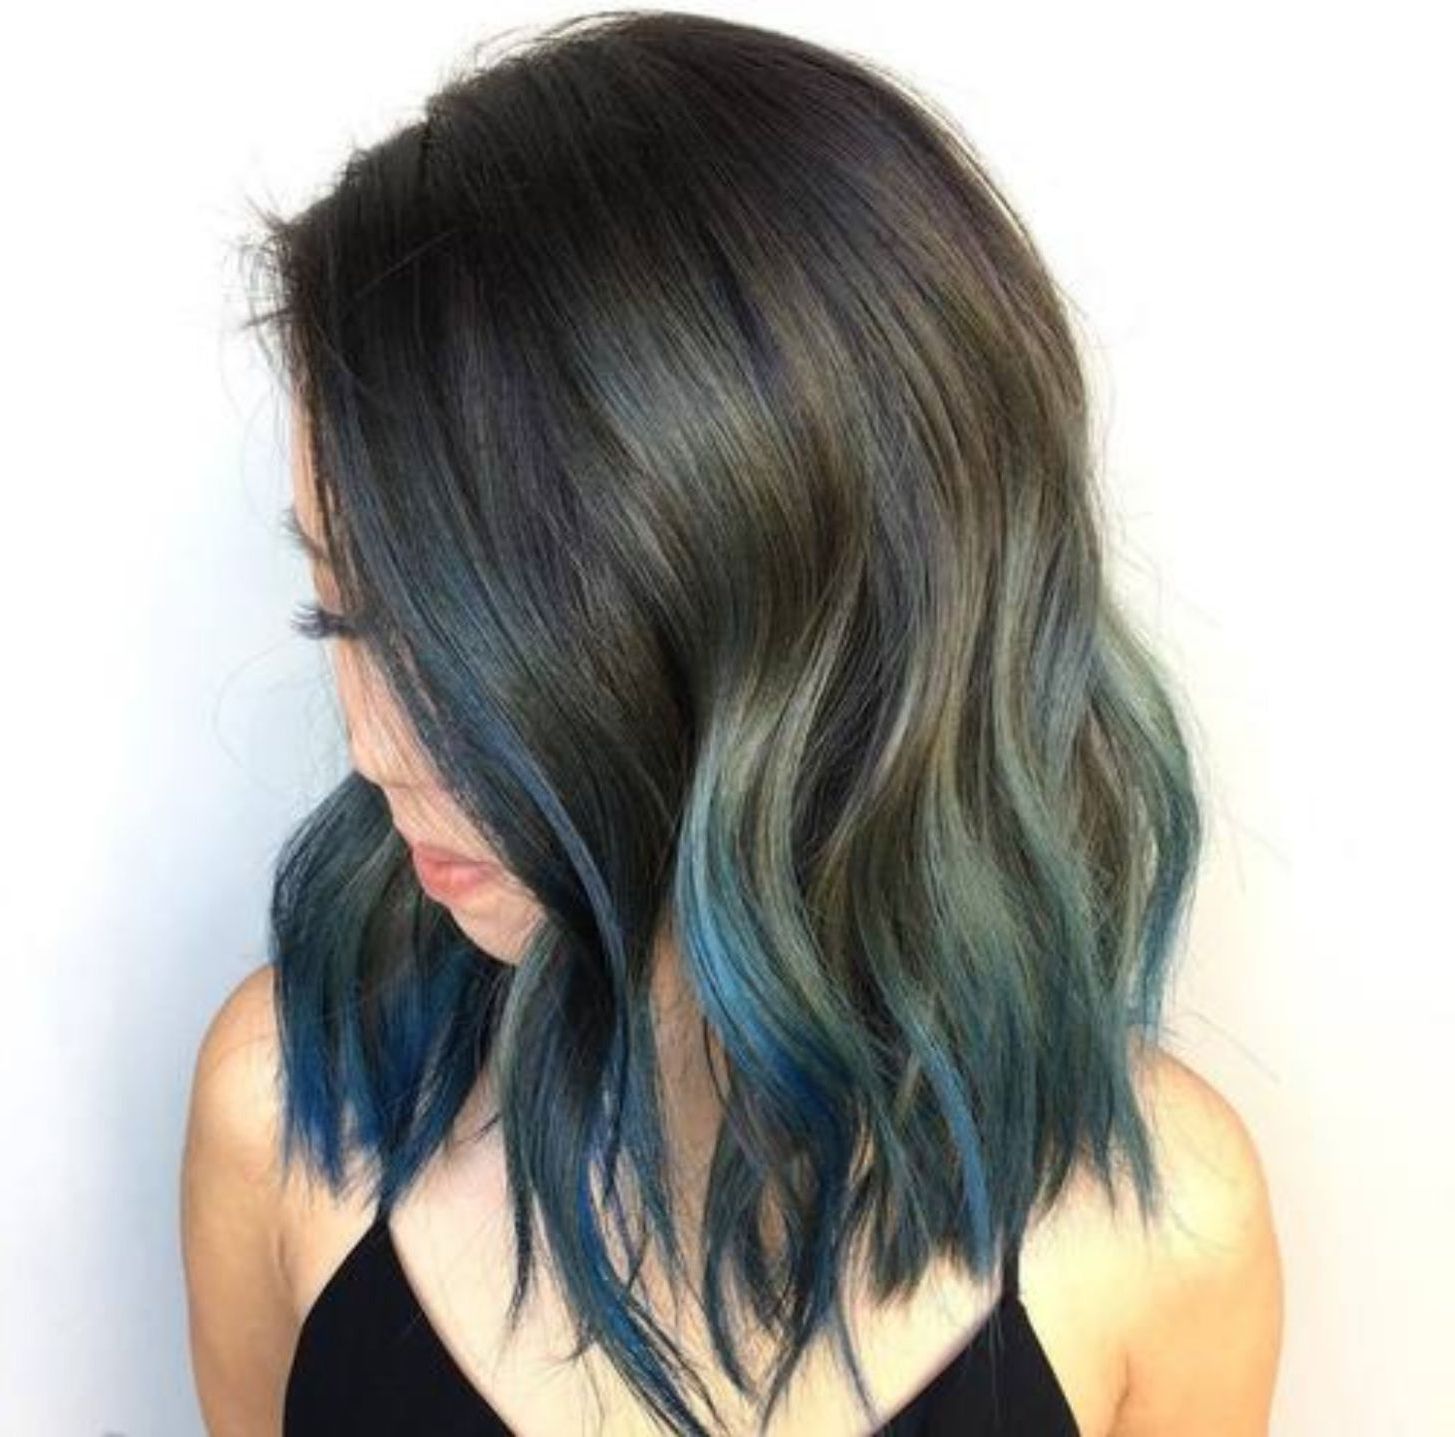 60 Inspiring Long Bob Hairstyles And Haircuts | Hairs | Pinterest In Blue Balayage For Black Choppy Bob Hairstyles (View 1 of 20)